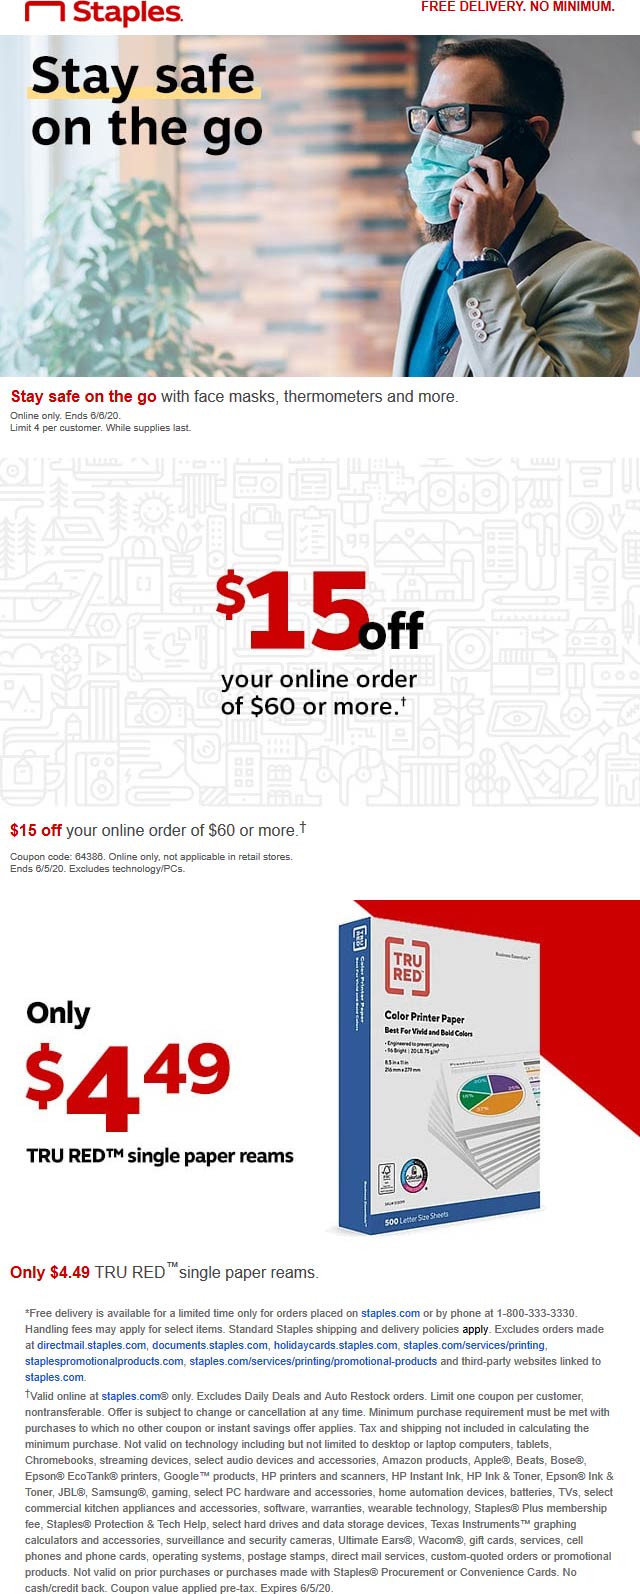 15 off 60 online at Staples via promo code 64386 free delivery no